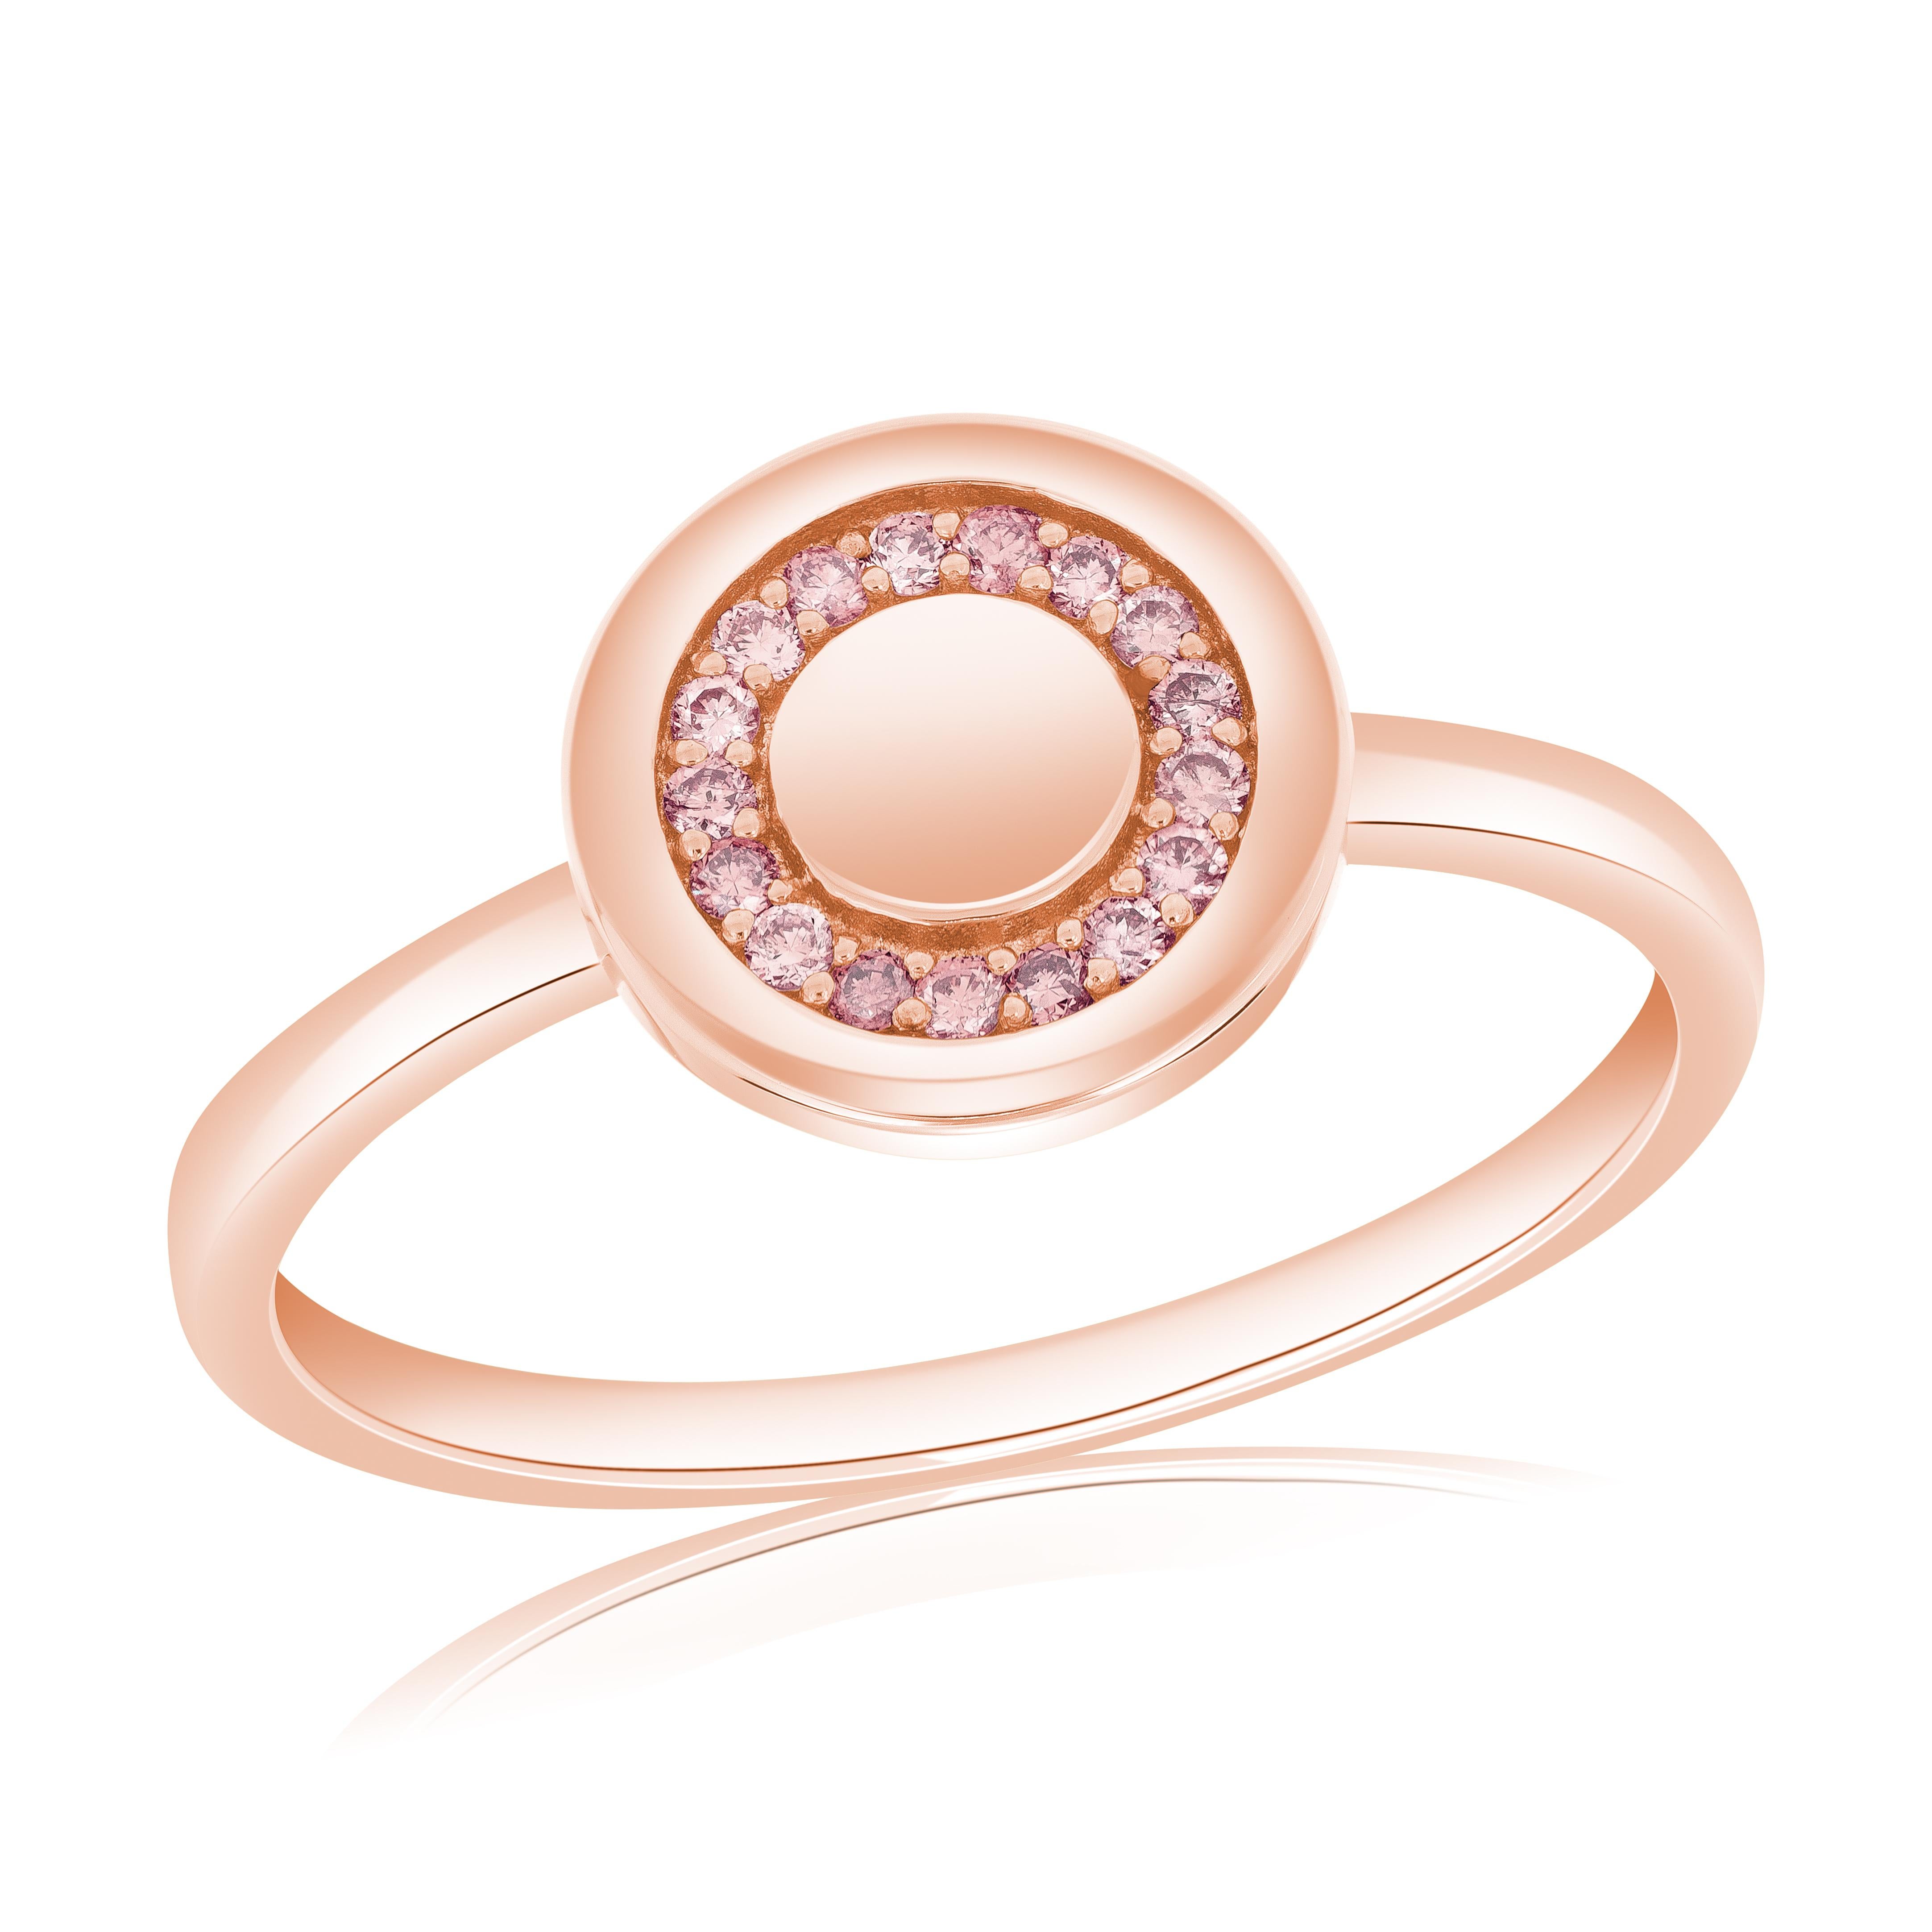 The 18M00742-RG ring is a stunning piece that showcases a blush pink circle disk design adorned with 18 natural pink diamonds, weighing a total of 0.09 carats. The delicate pink diamonds add a touch of beauty and sophistication to the ring, creating